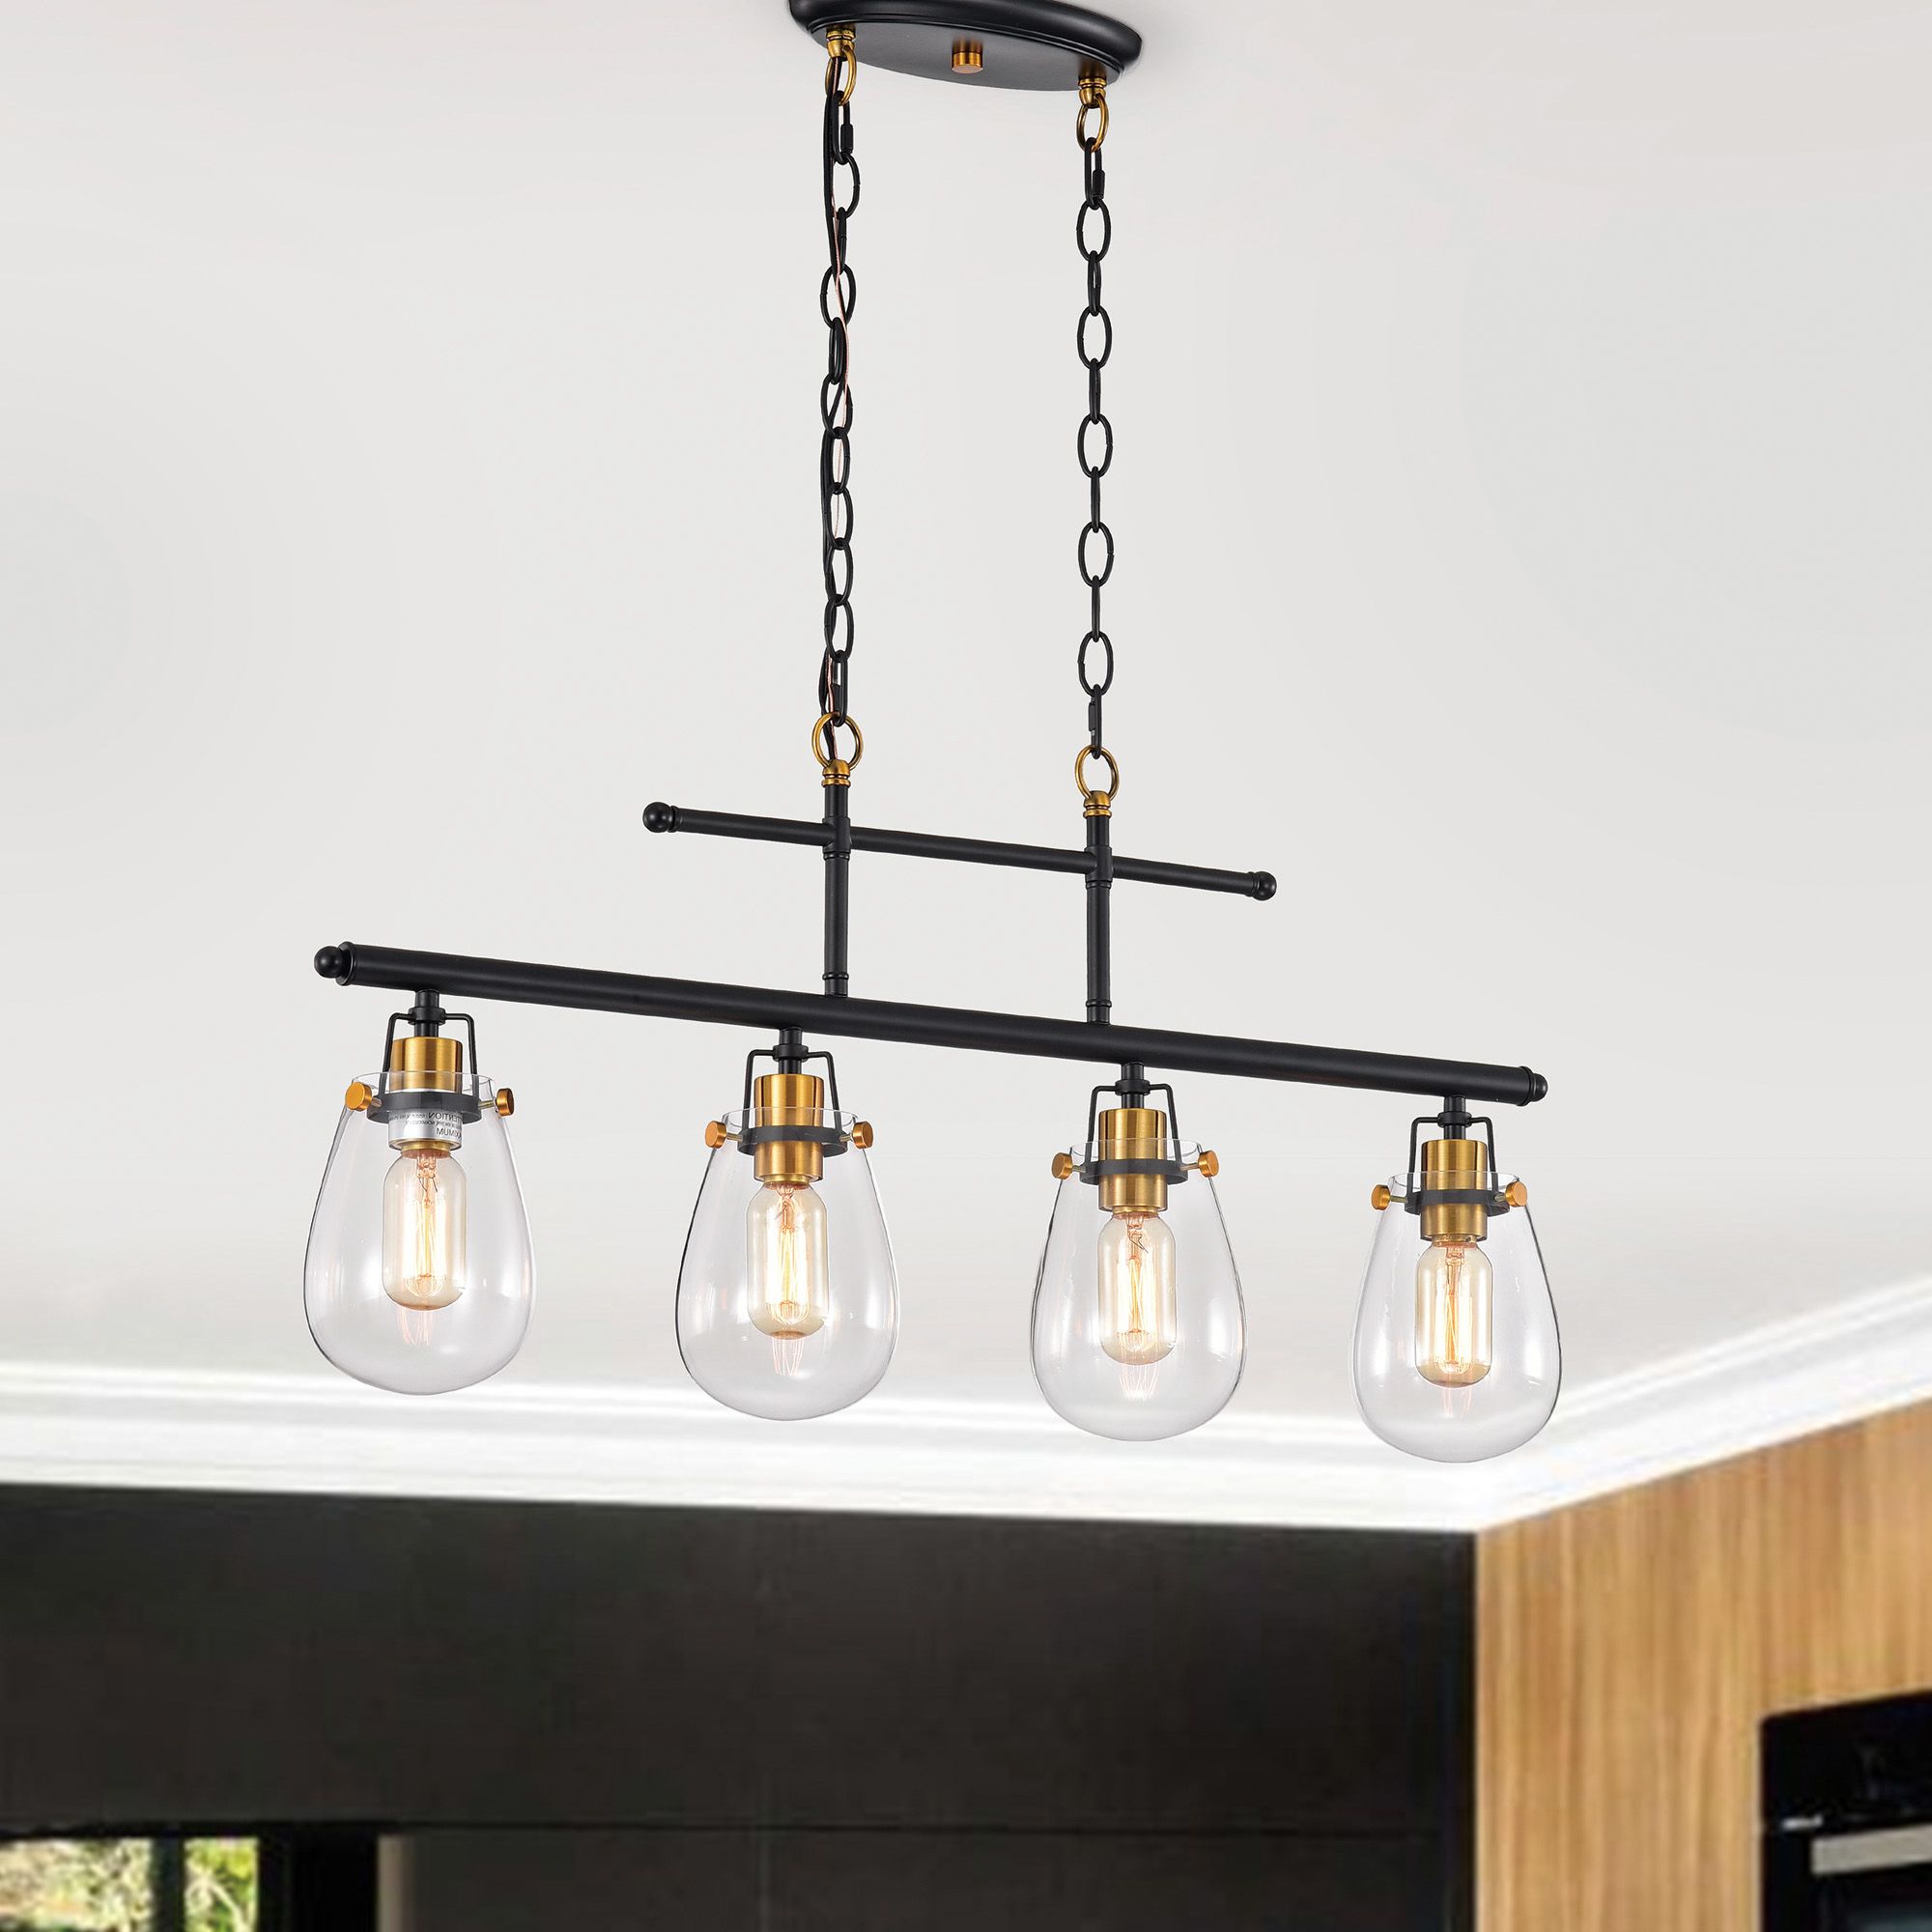 Ontario 4  Light Black And Antique Gold Kitchen Island Throughout Trendy Black And Gold Kitchen Island Light Pendant (View 2 of 20)